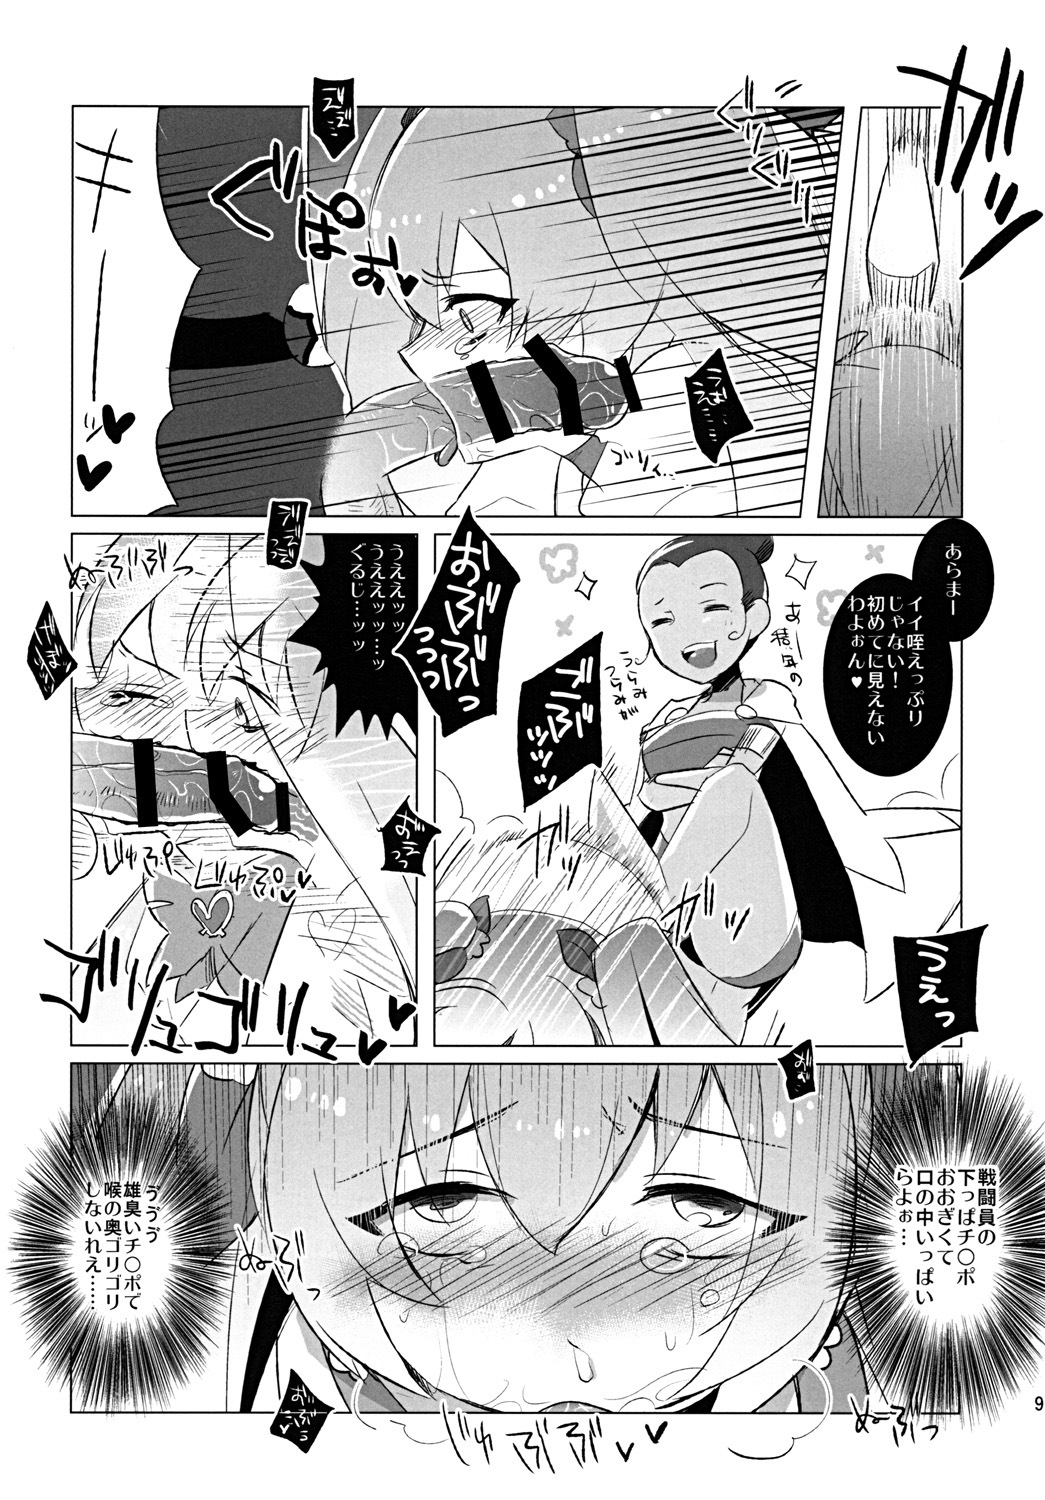 [clear glass (menimo)] Kite Mite Sawatte ☆ (Heart Catch Precure!) page 8 full